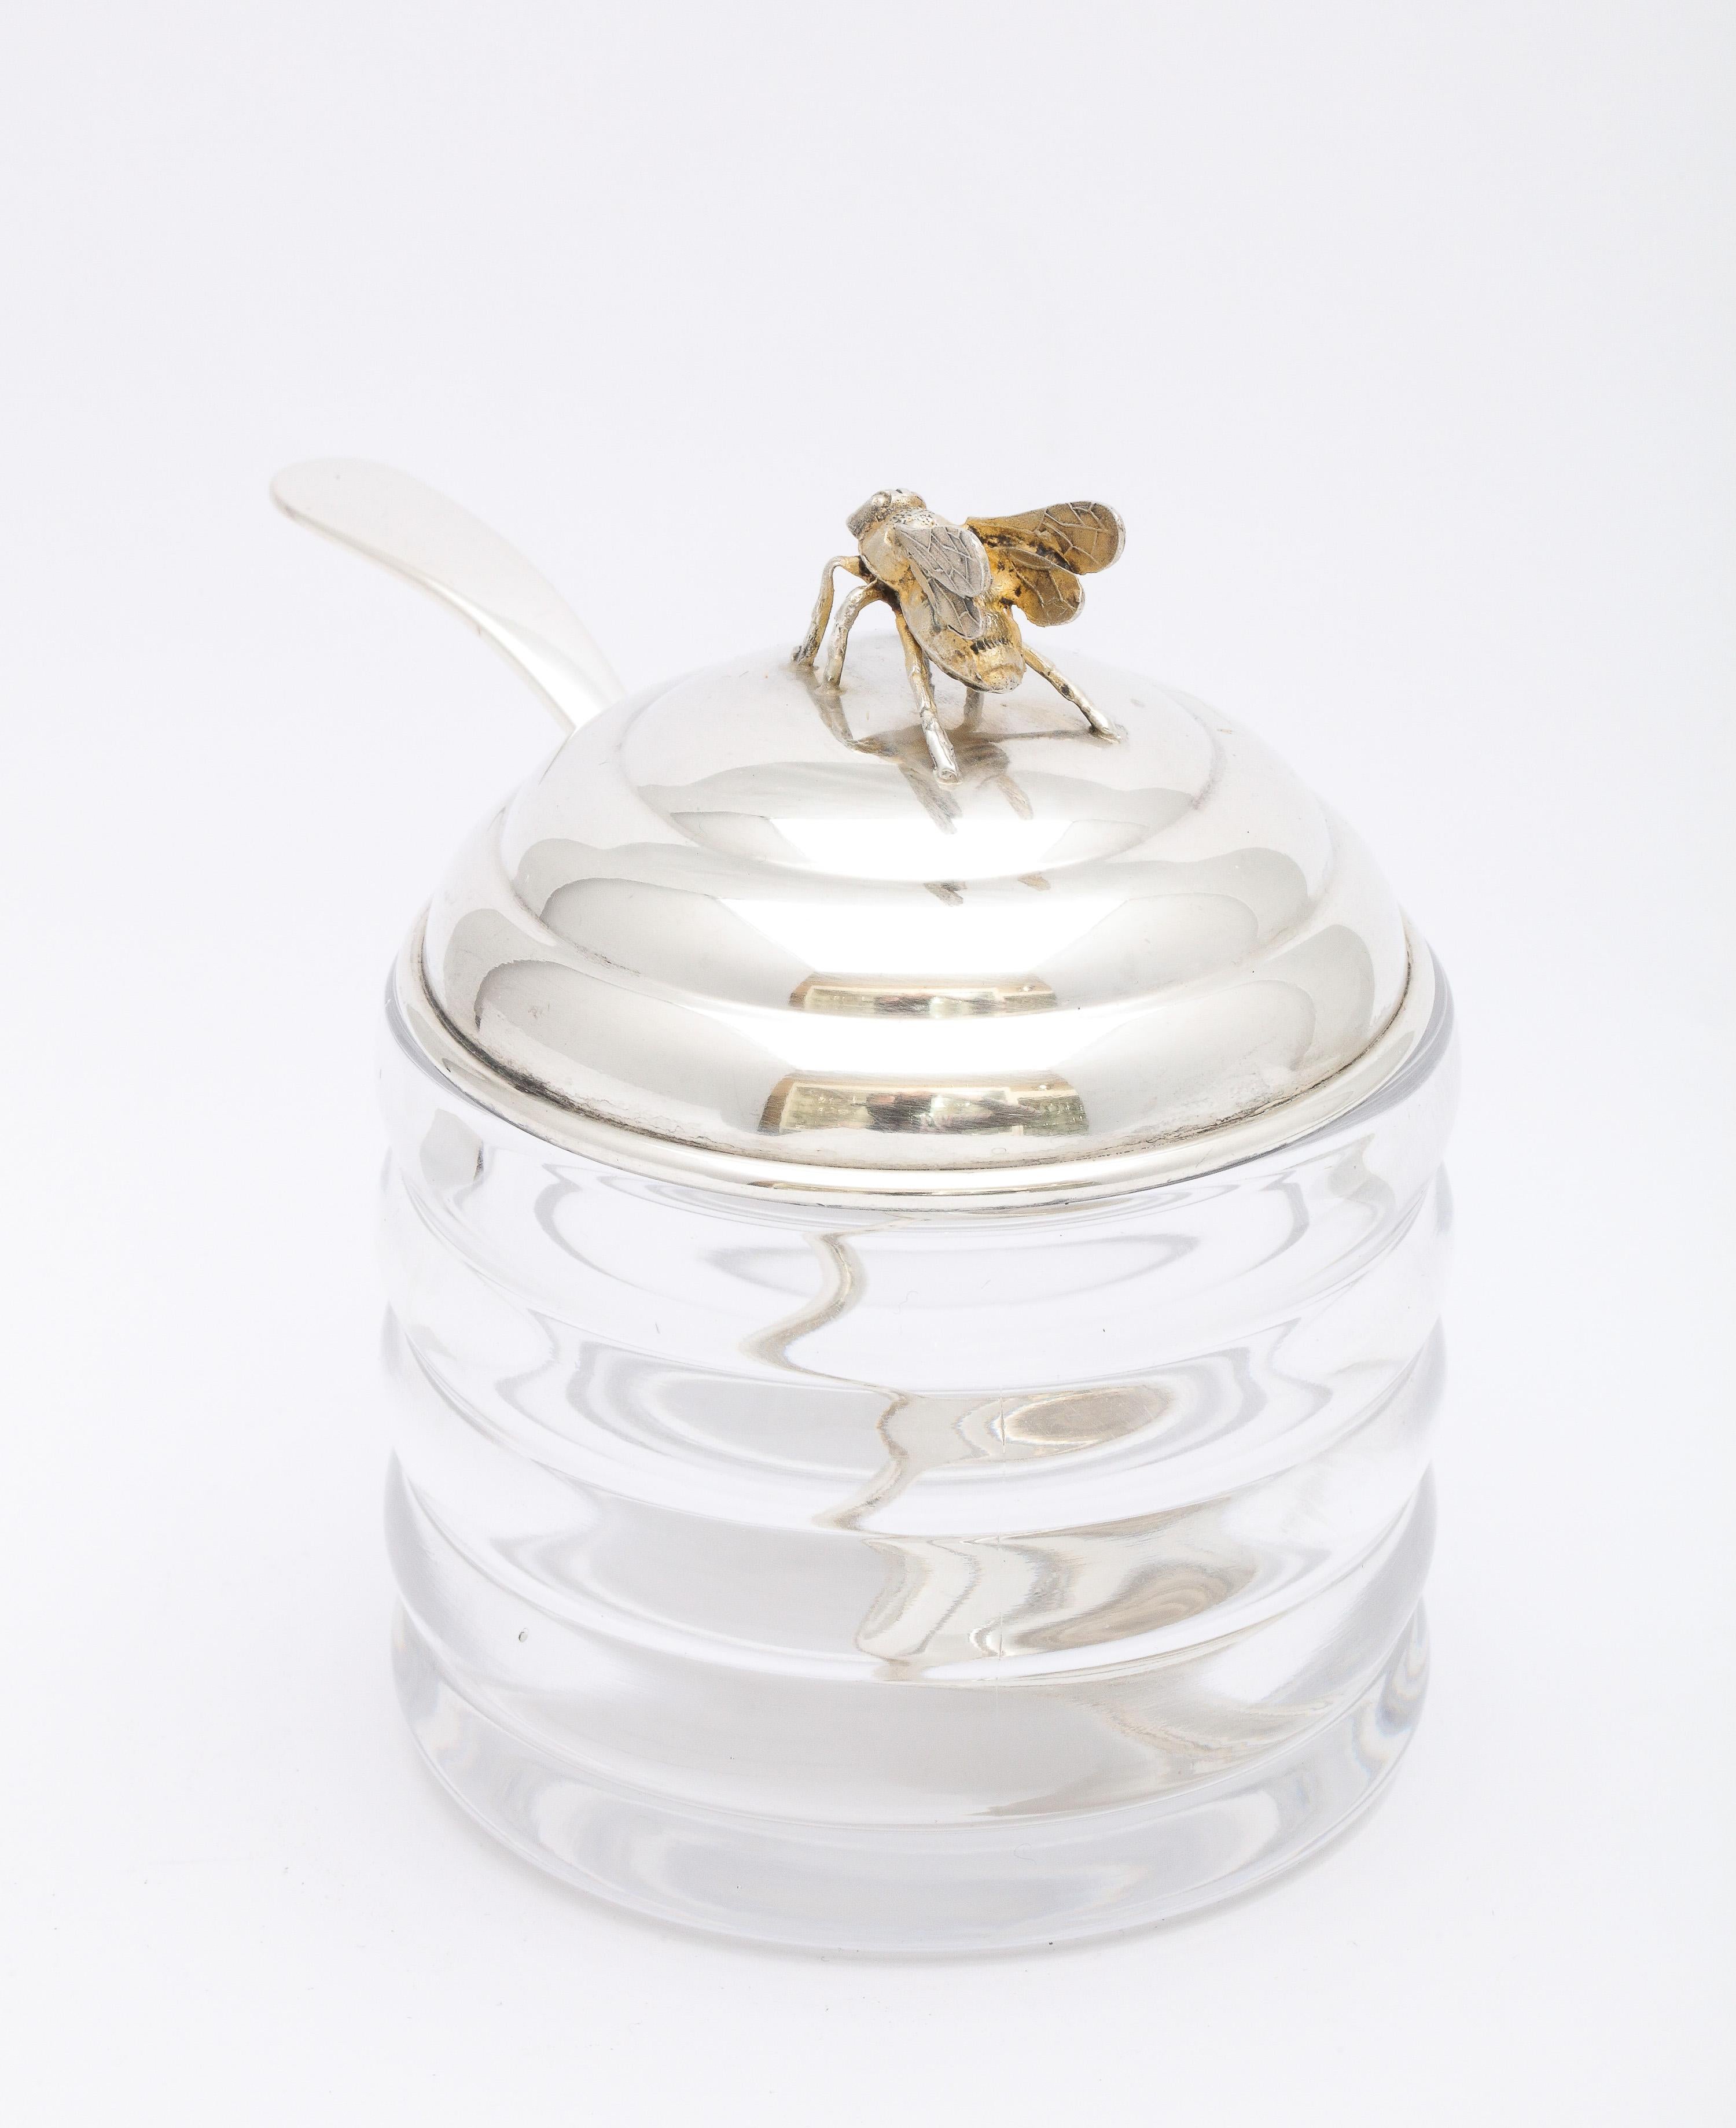 Art Deco Period Sterling Silver-Mounted Beehive-Form Honey Jar 4